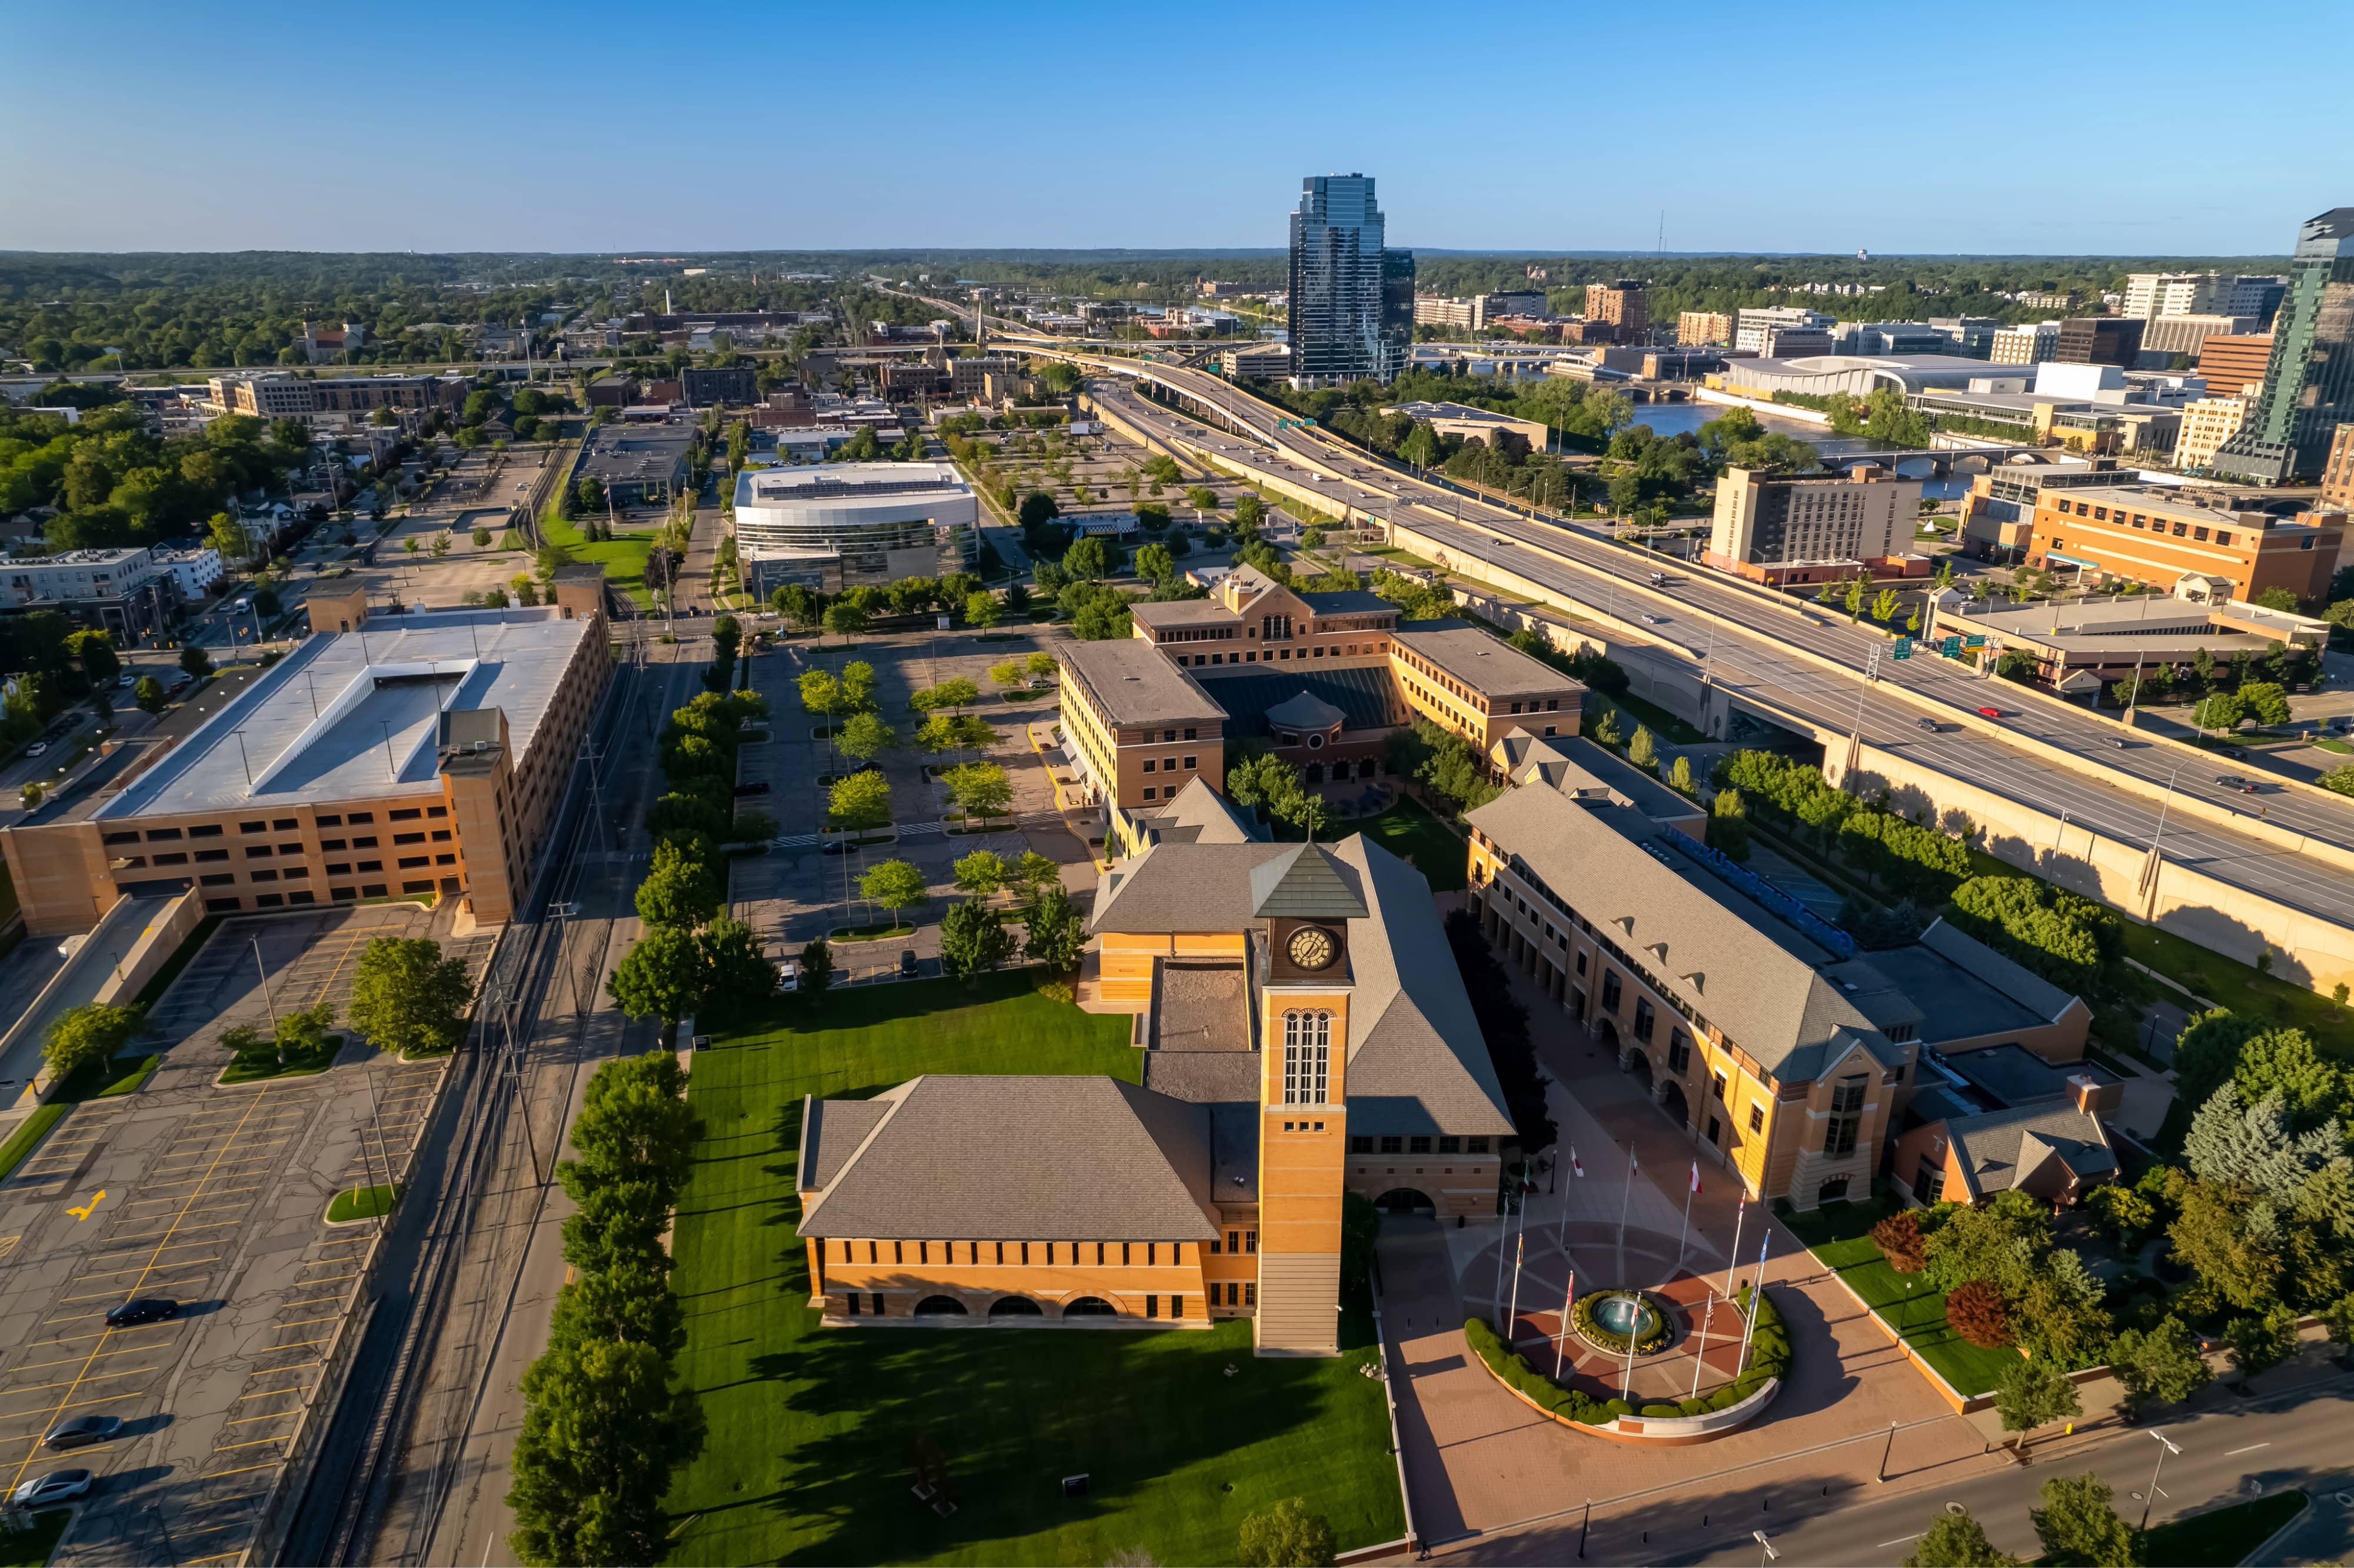 Aerial view of Grand Valley state university campus in Grand Rapids, Michigan